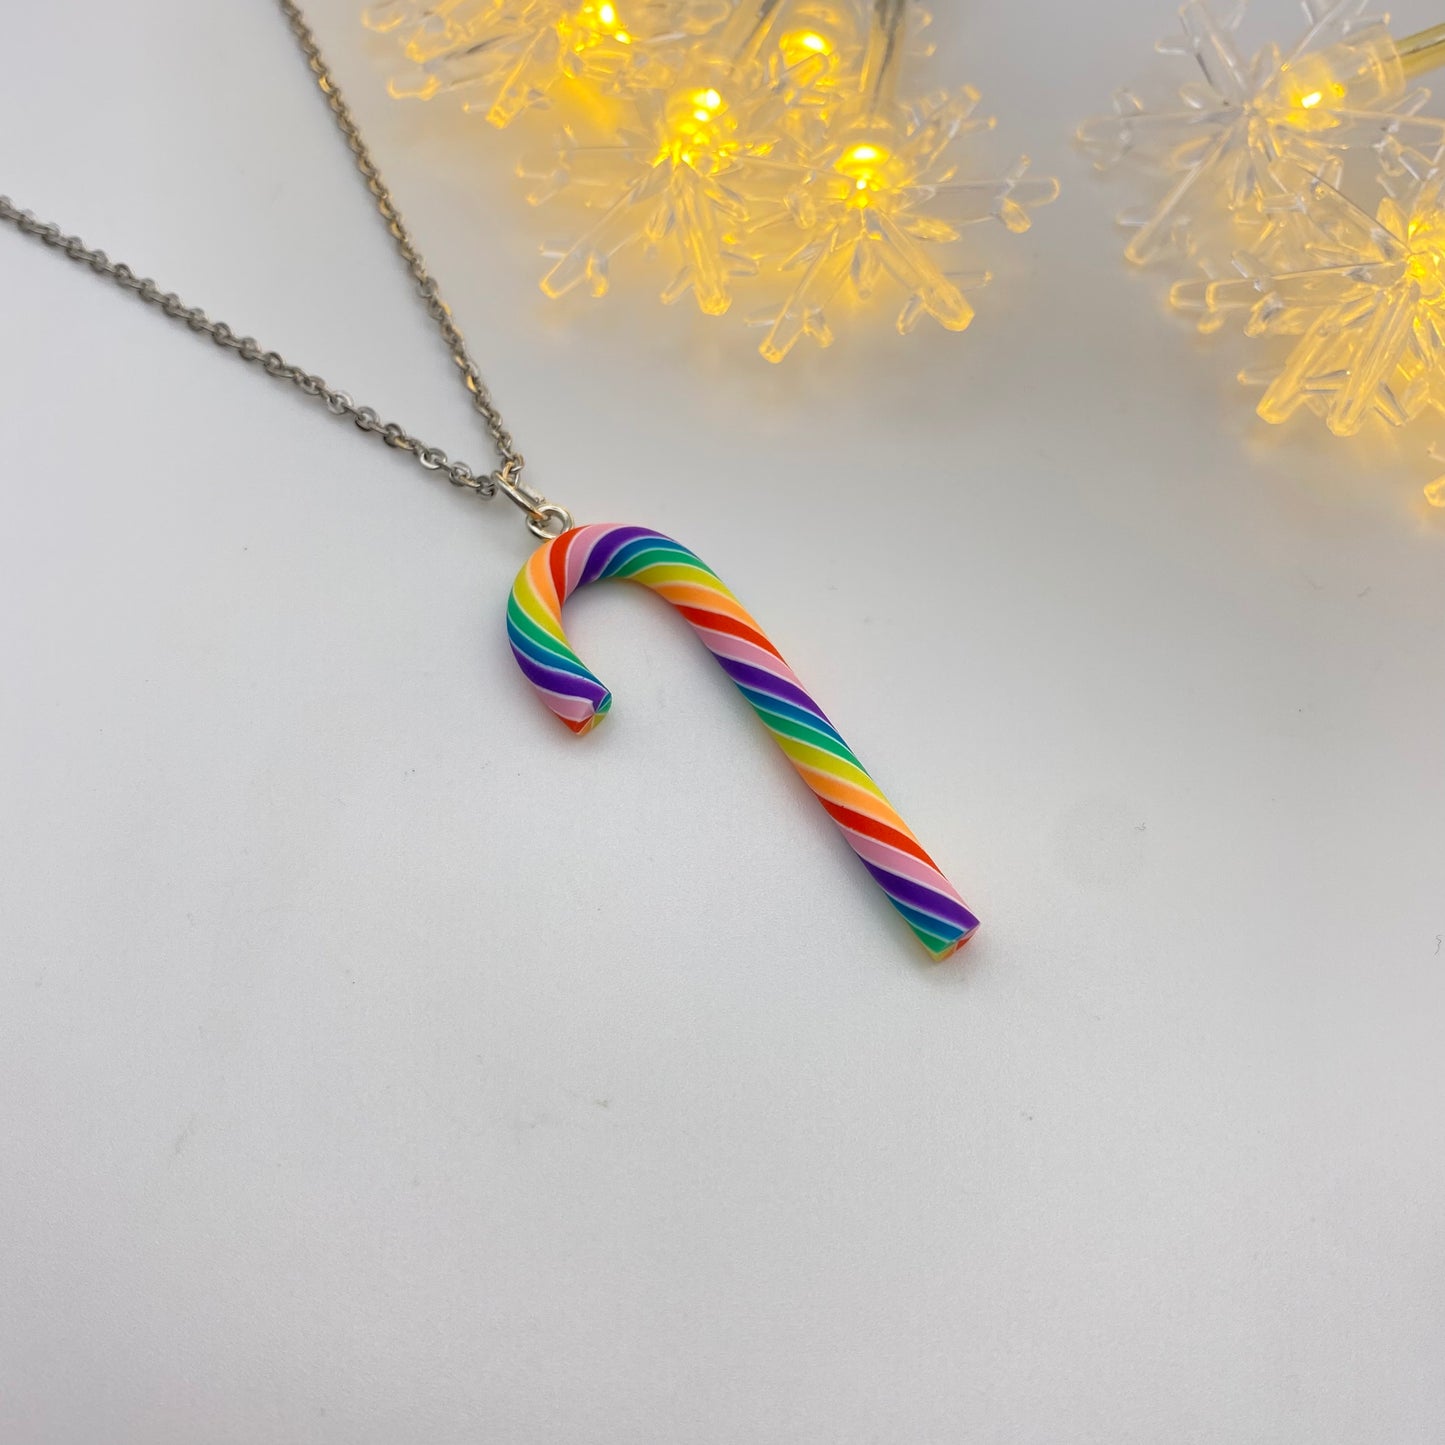 Pastel Rainbow Candy Cane Necklace